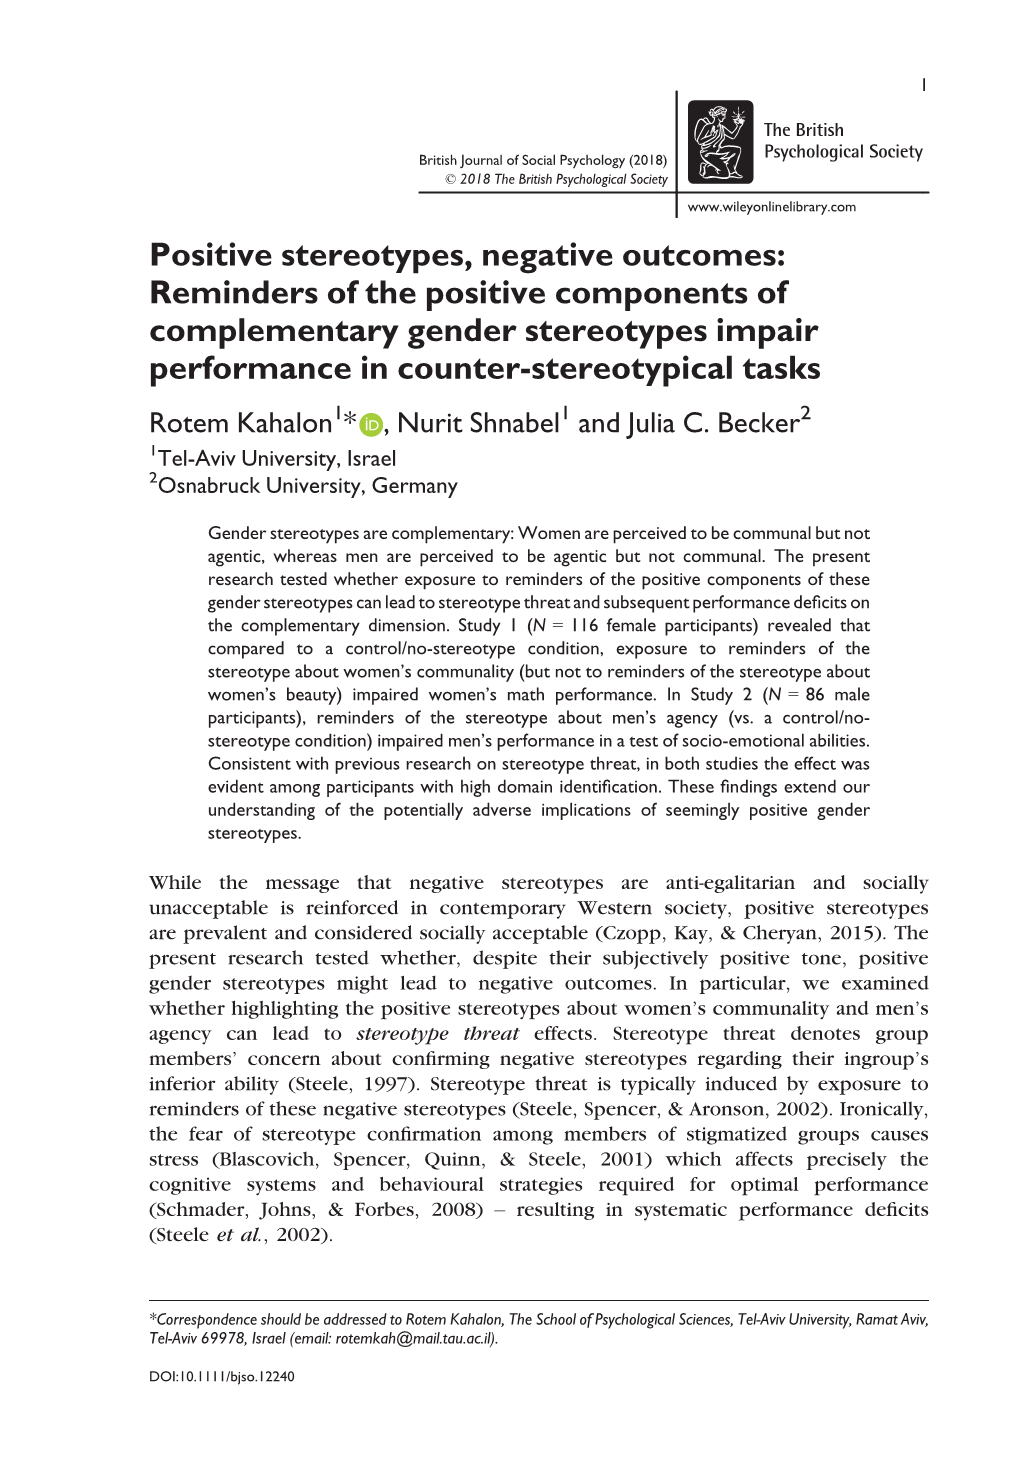 Positive Stereotypes, Negative Outcomes: Reminders of the Positive Components of Complementary Gender Stereotypes Impair Perform